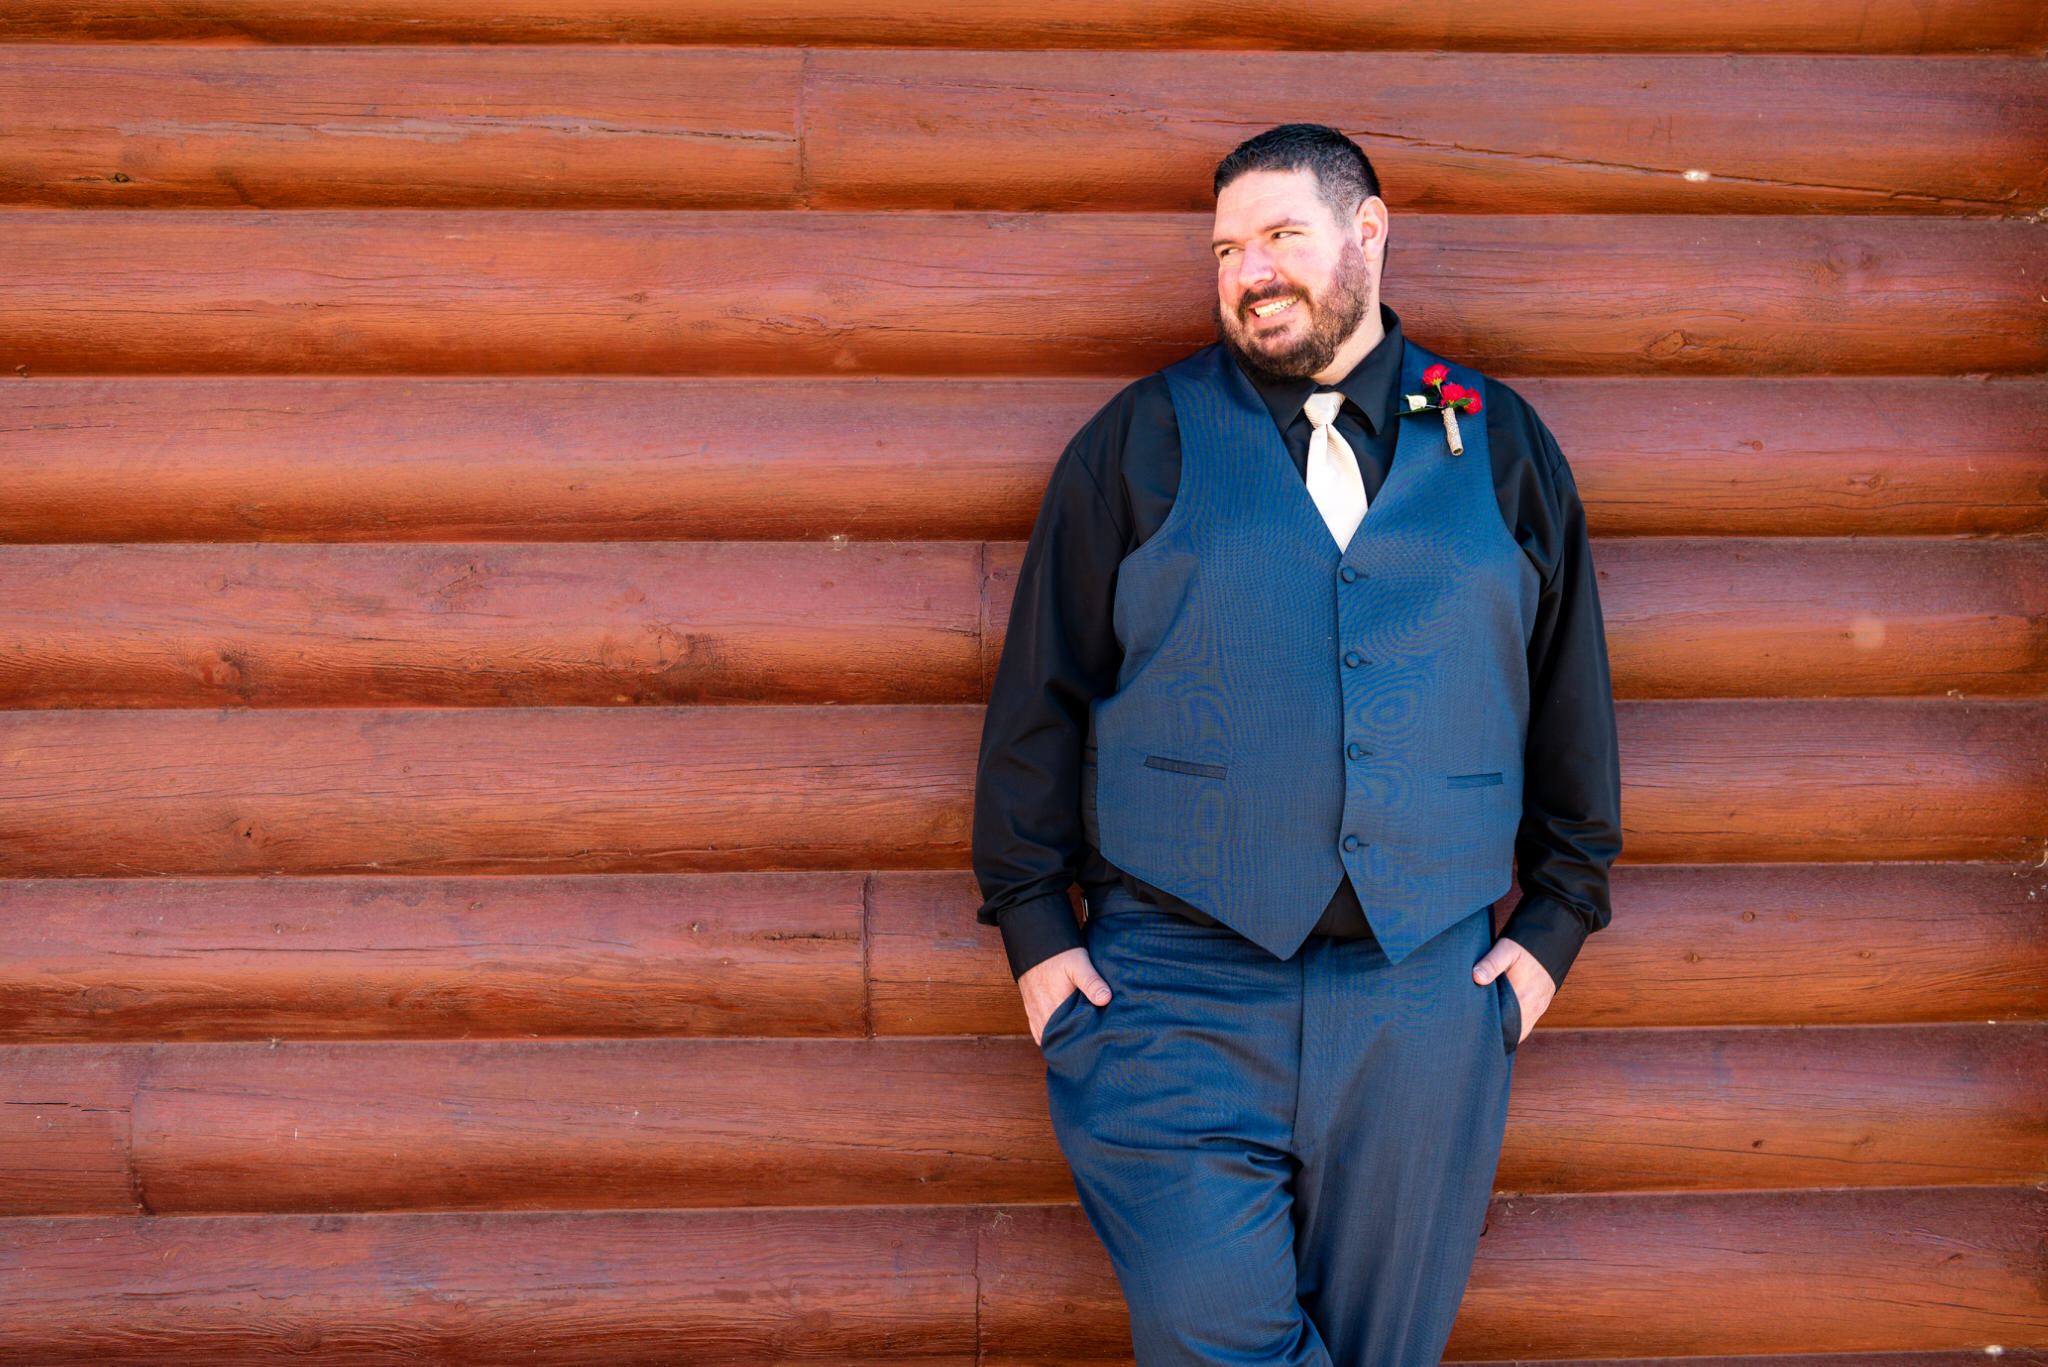 A groom portrait of a groom standing against a wall. Briana and Kevin's Terry Bison Ranch Wedding by Wyoming Wedding Photographer Jennifer Garza, Wyoming Wedding, Wyoming Wedding Photographer, Wyoming Engagement Photographer, Wyoming Bride, Couples Goals, Wyoming Wedding, Wedding Photographer, Wyoming Photographer, Wyoming Wedding Photography, Wedding Inspiration, Destination Wedding Photographer, Fall Wedding, Ranch Wedding, Rustic Wedding Inspiration, Wedding Dress Inspo